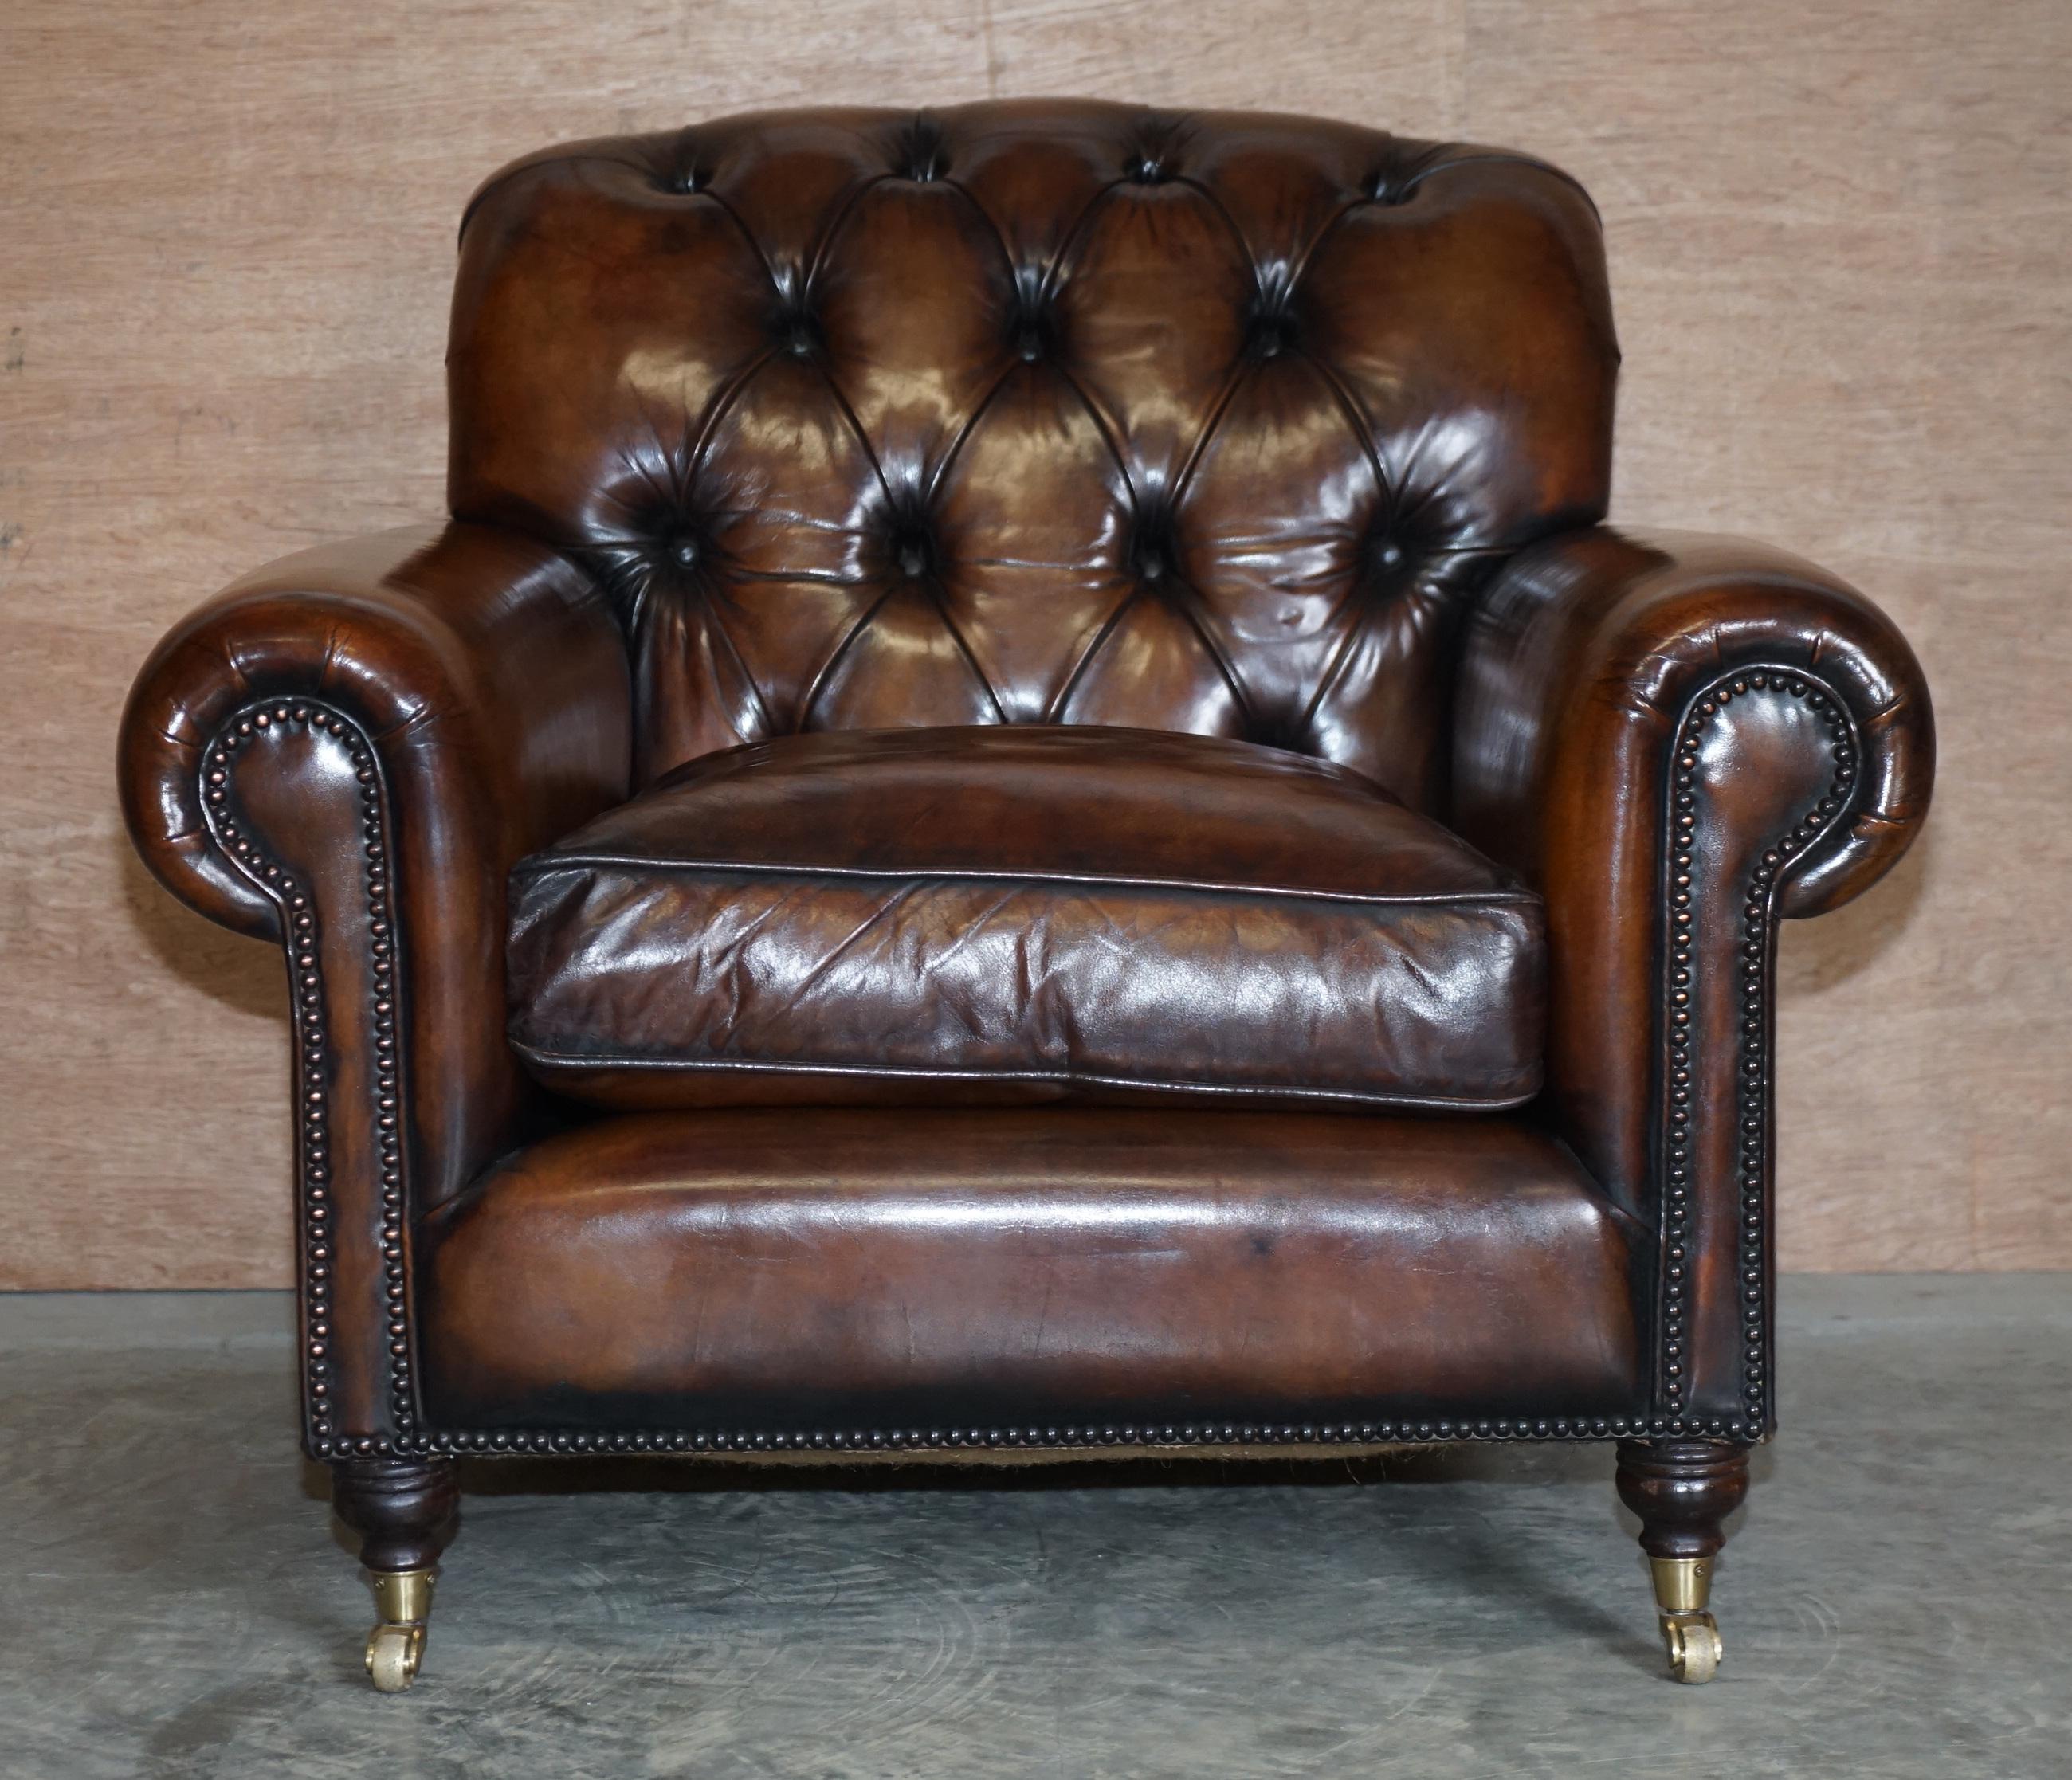 We are delighted to offer for sale this stunning hand made in England fully restored George Smith Cigar brown leather armchair with Chesterfield tufted back

A very comfortable and well made club or lounge armchair, it has an elongated seat